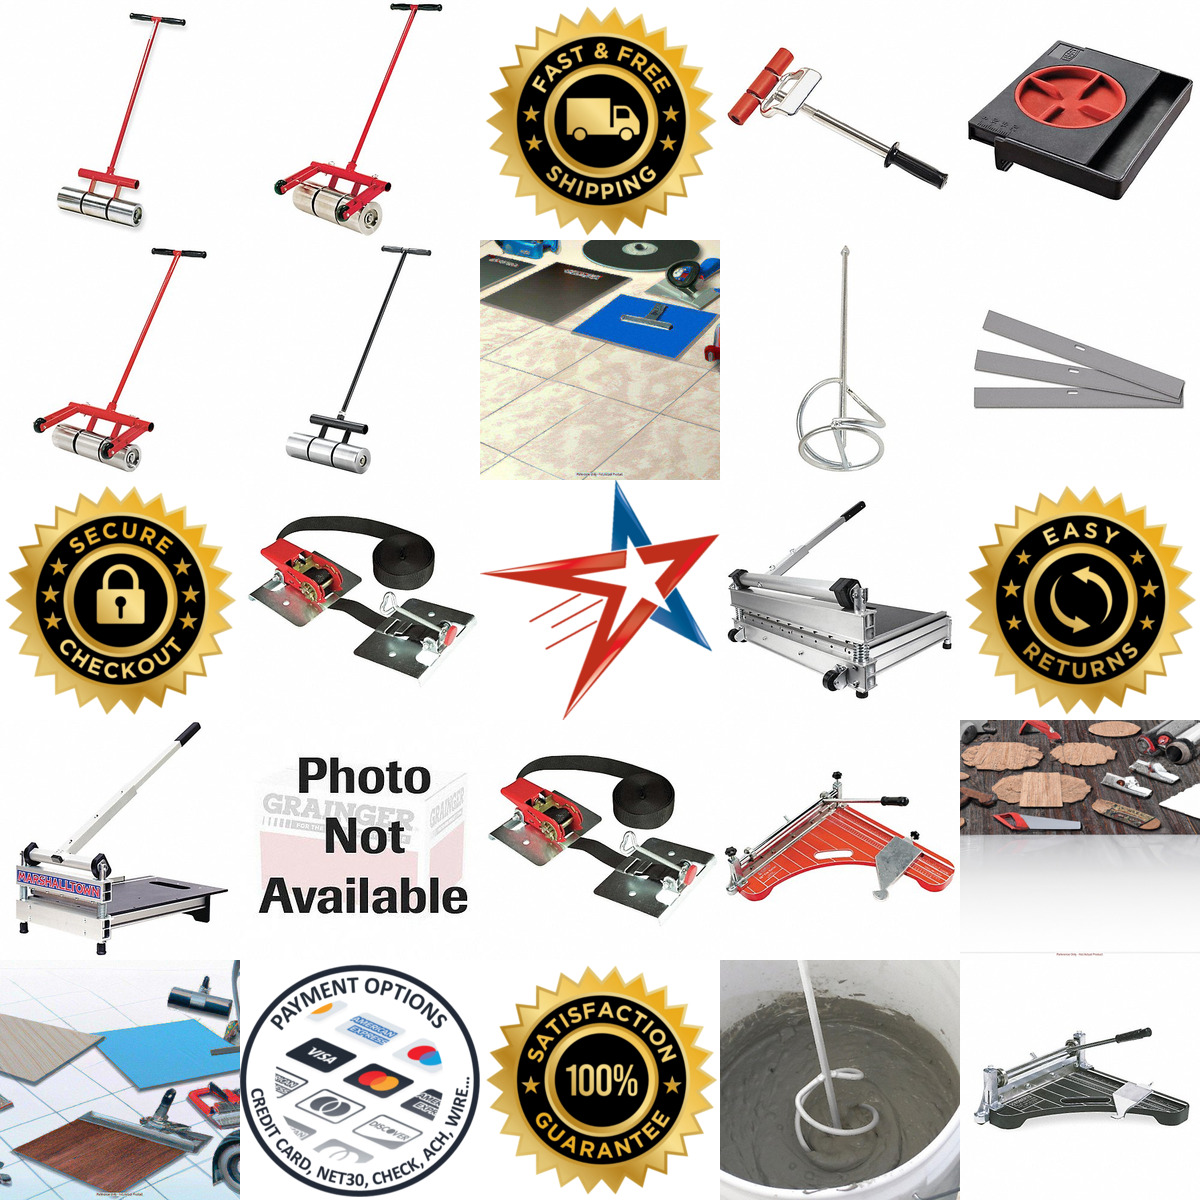 A selection of Linoleum and Vinyl Flooring Tools products on GoVets